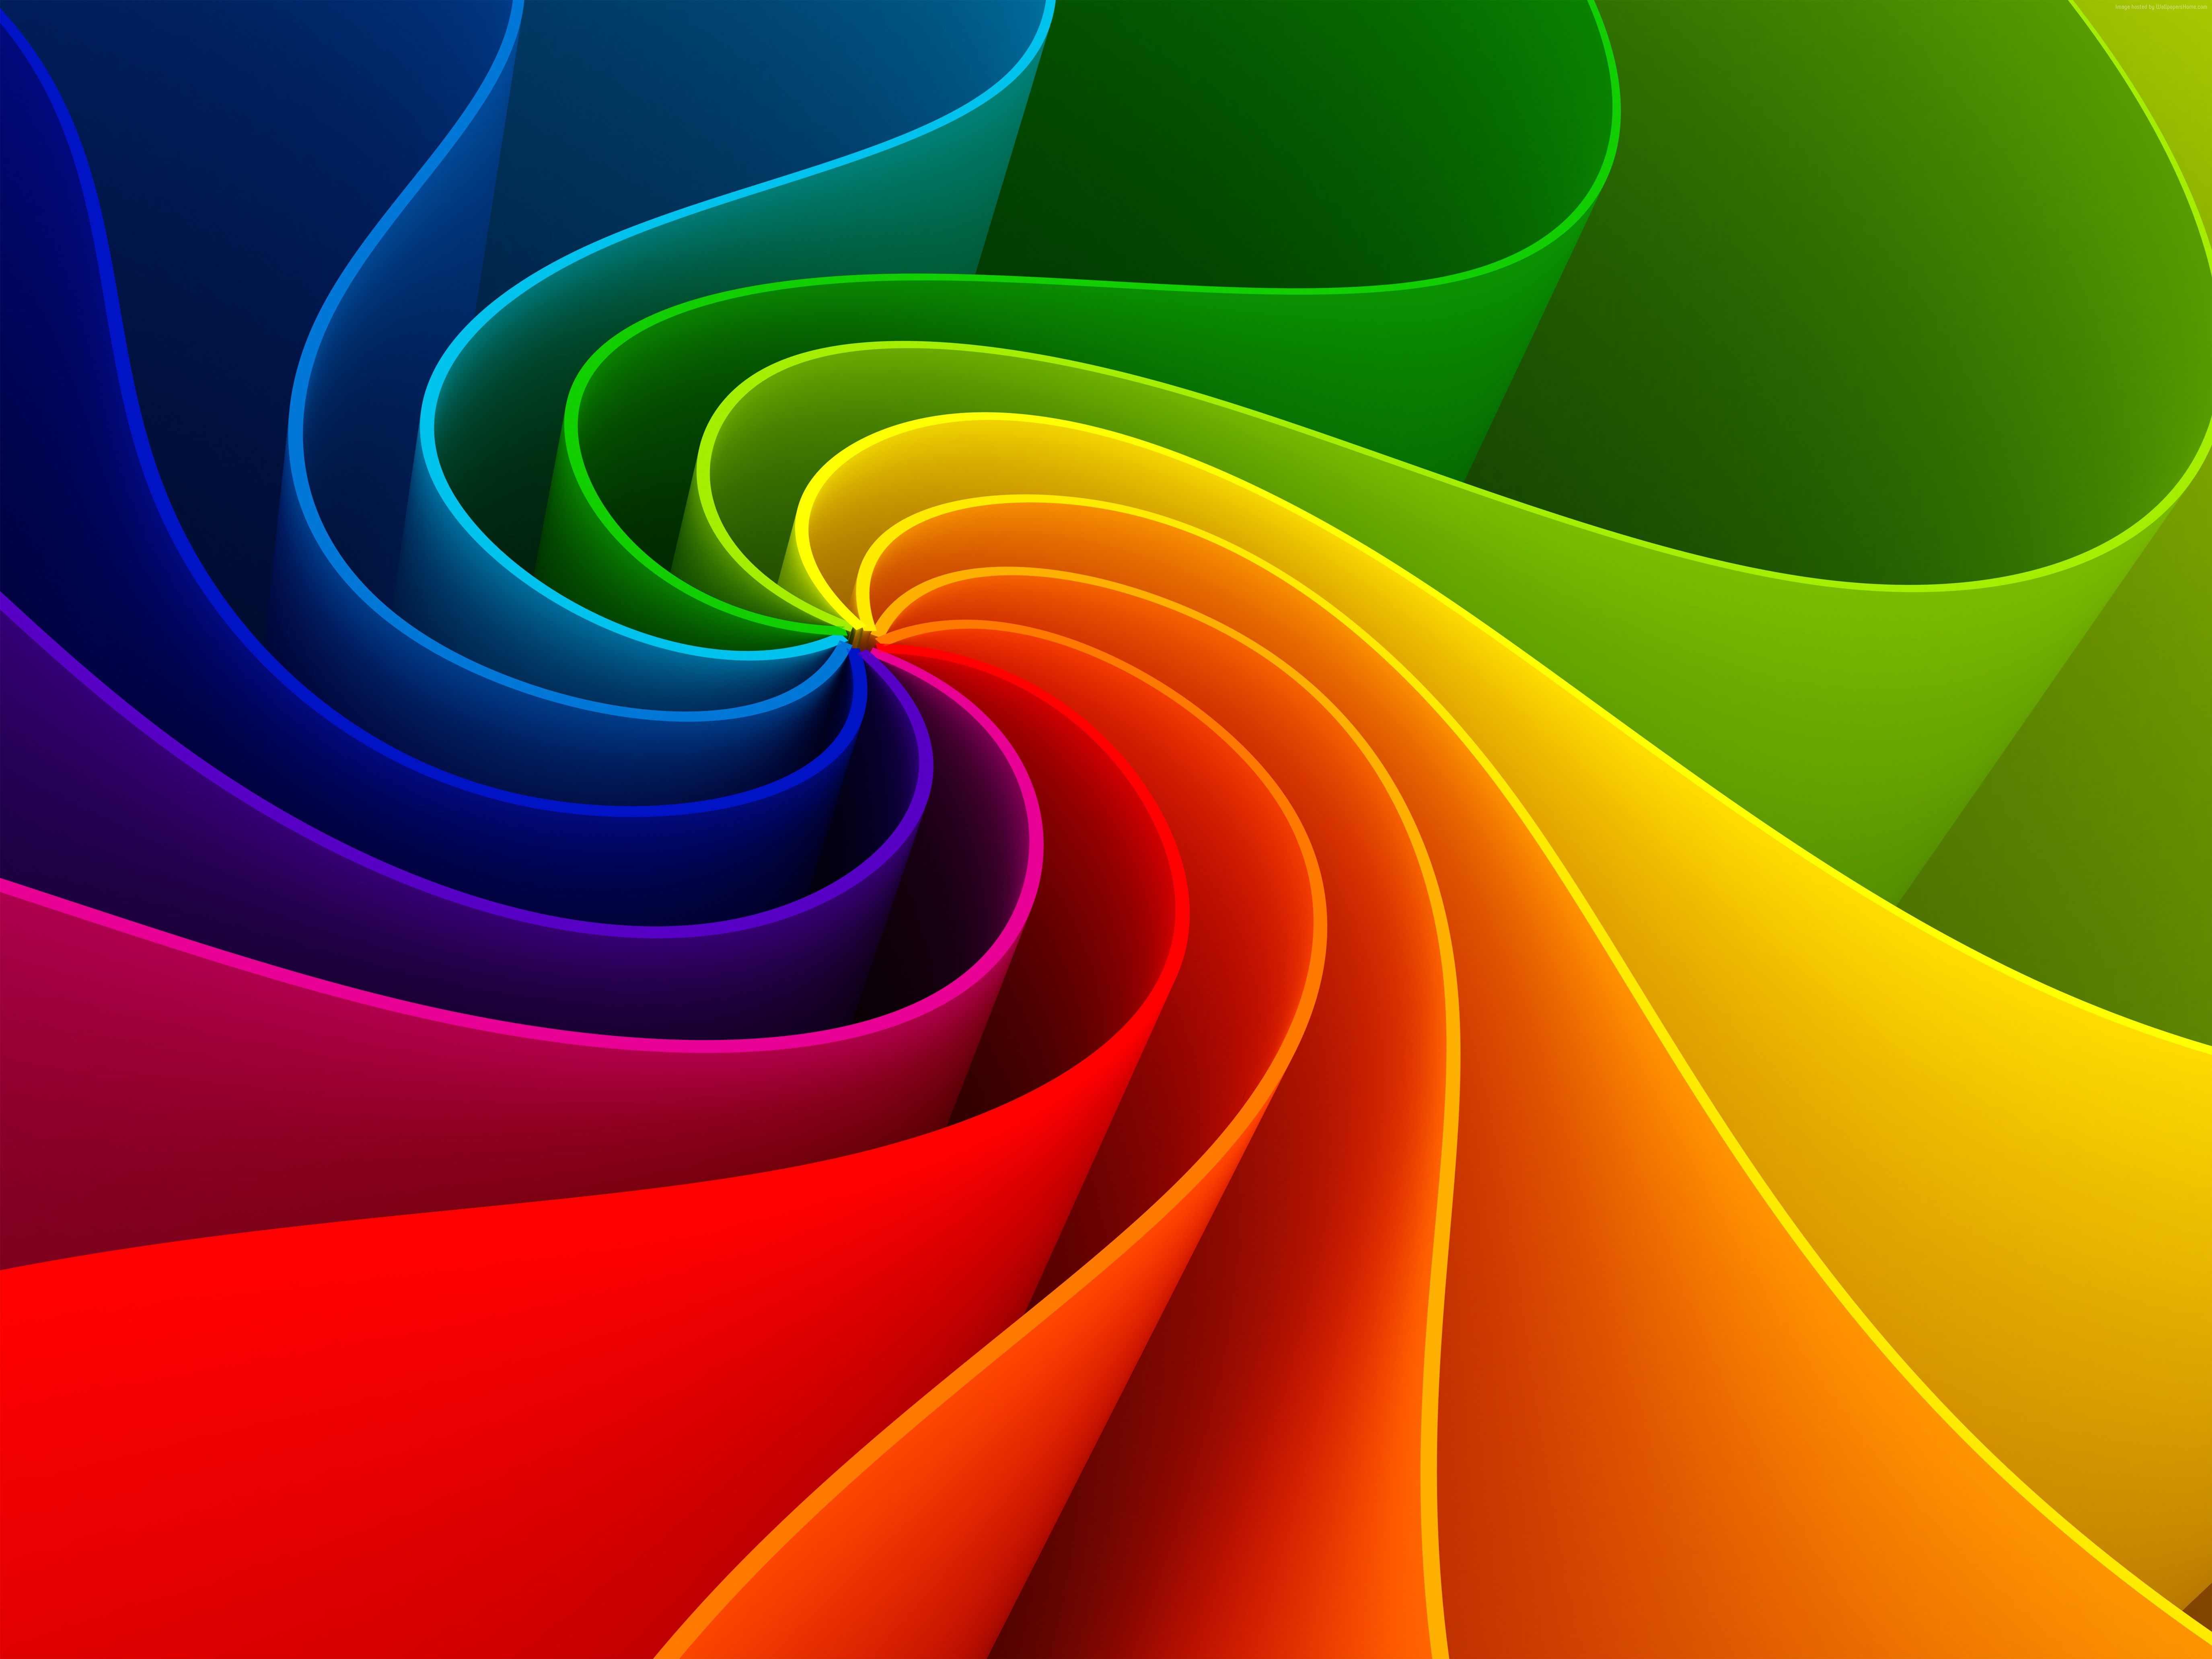 background #pages #rainbow k k k K #wallpaper #hdwallpaper #desktop. Rainbow abstract, Rainbow wallpaper, Colorful wallpaper